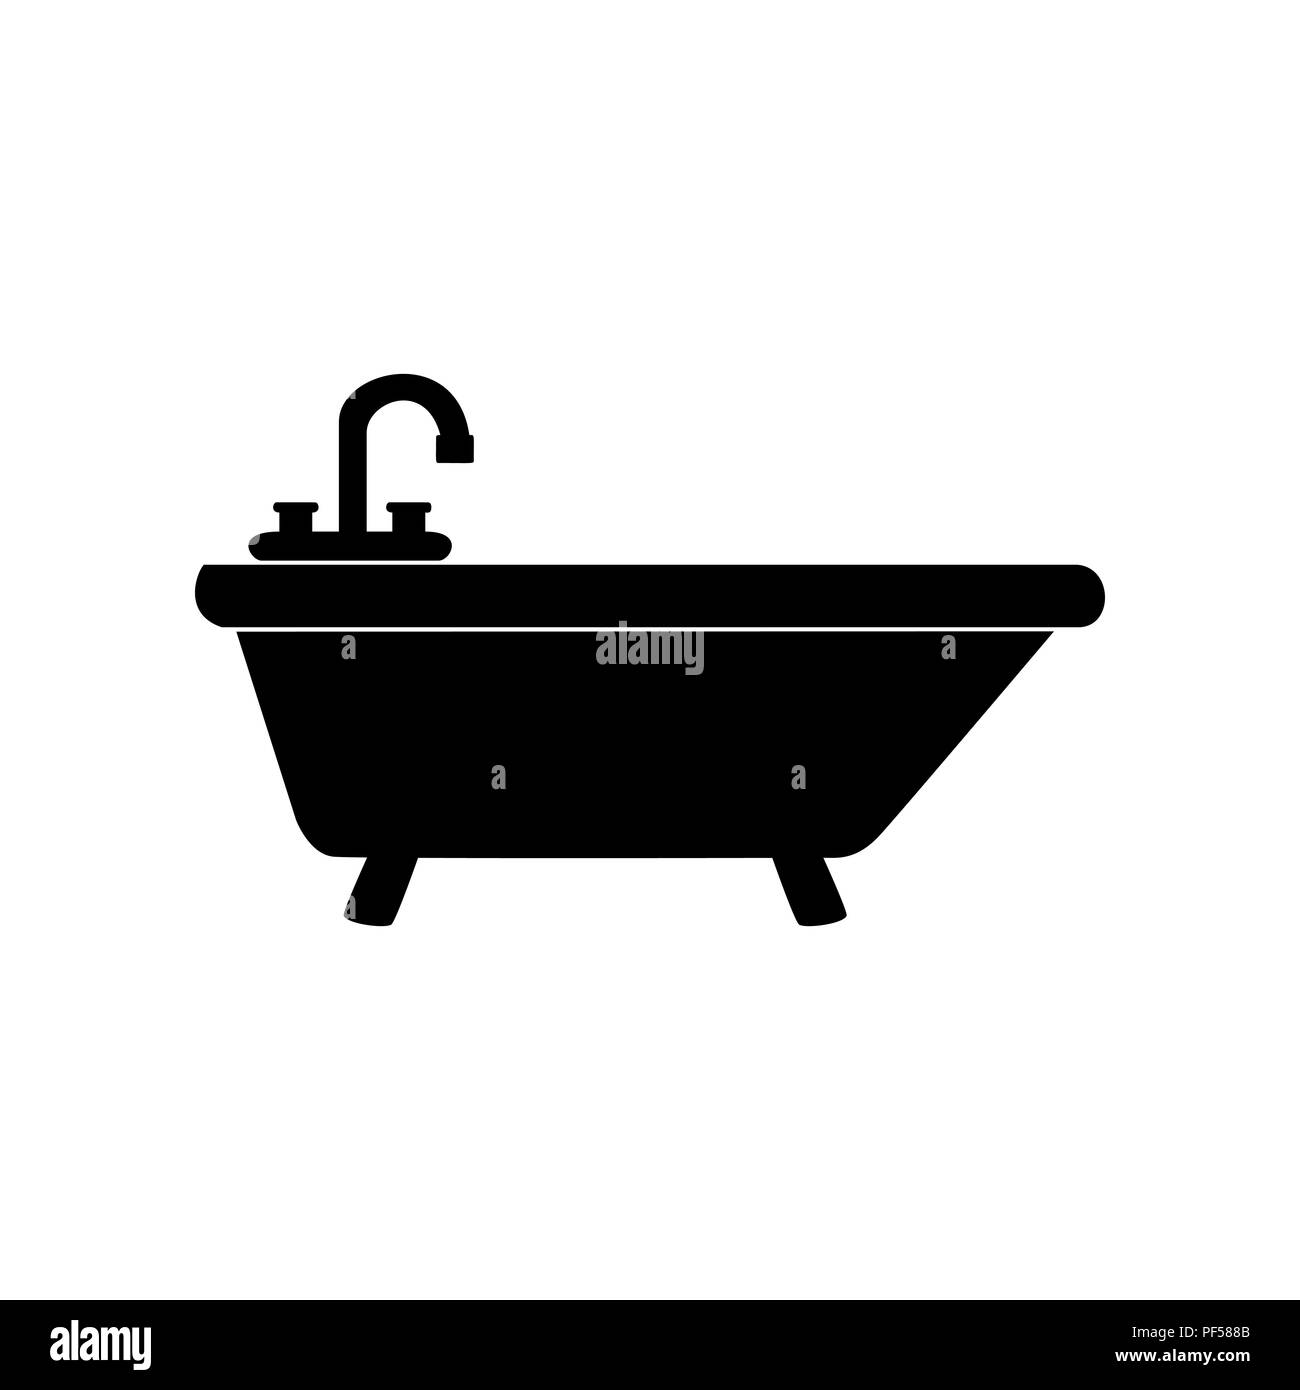 Bathtub sign illustration. Vector. Filled black icon at white background. Isolated. Stock Vector